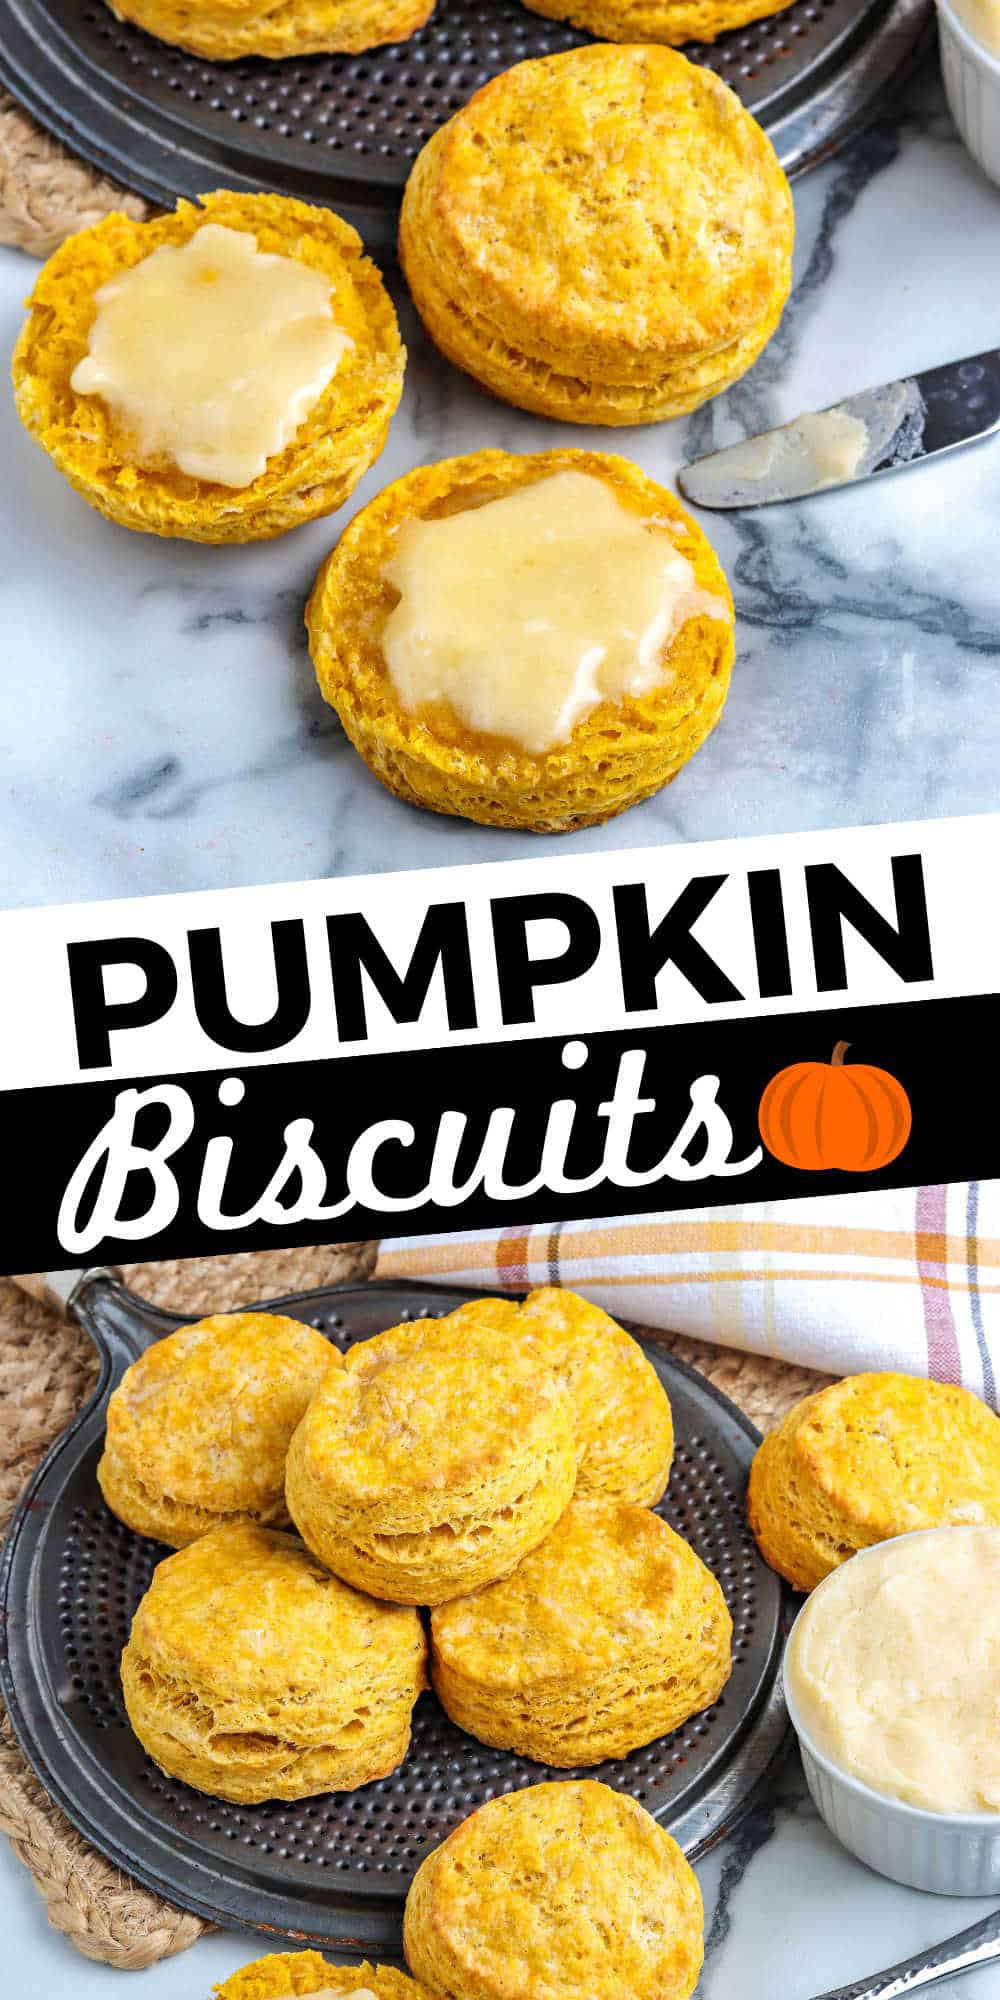 When fall arrives, there’s nothing like the warmth and comfort of homemade pumpkin biscuits. These tender delights are infused with cozy pumpkin and just a hint of spice via @foodfolksandfun